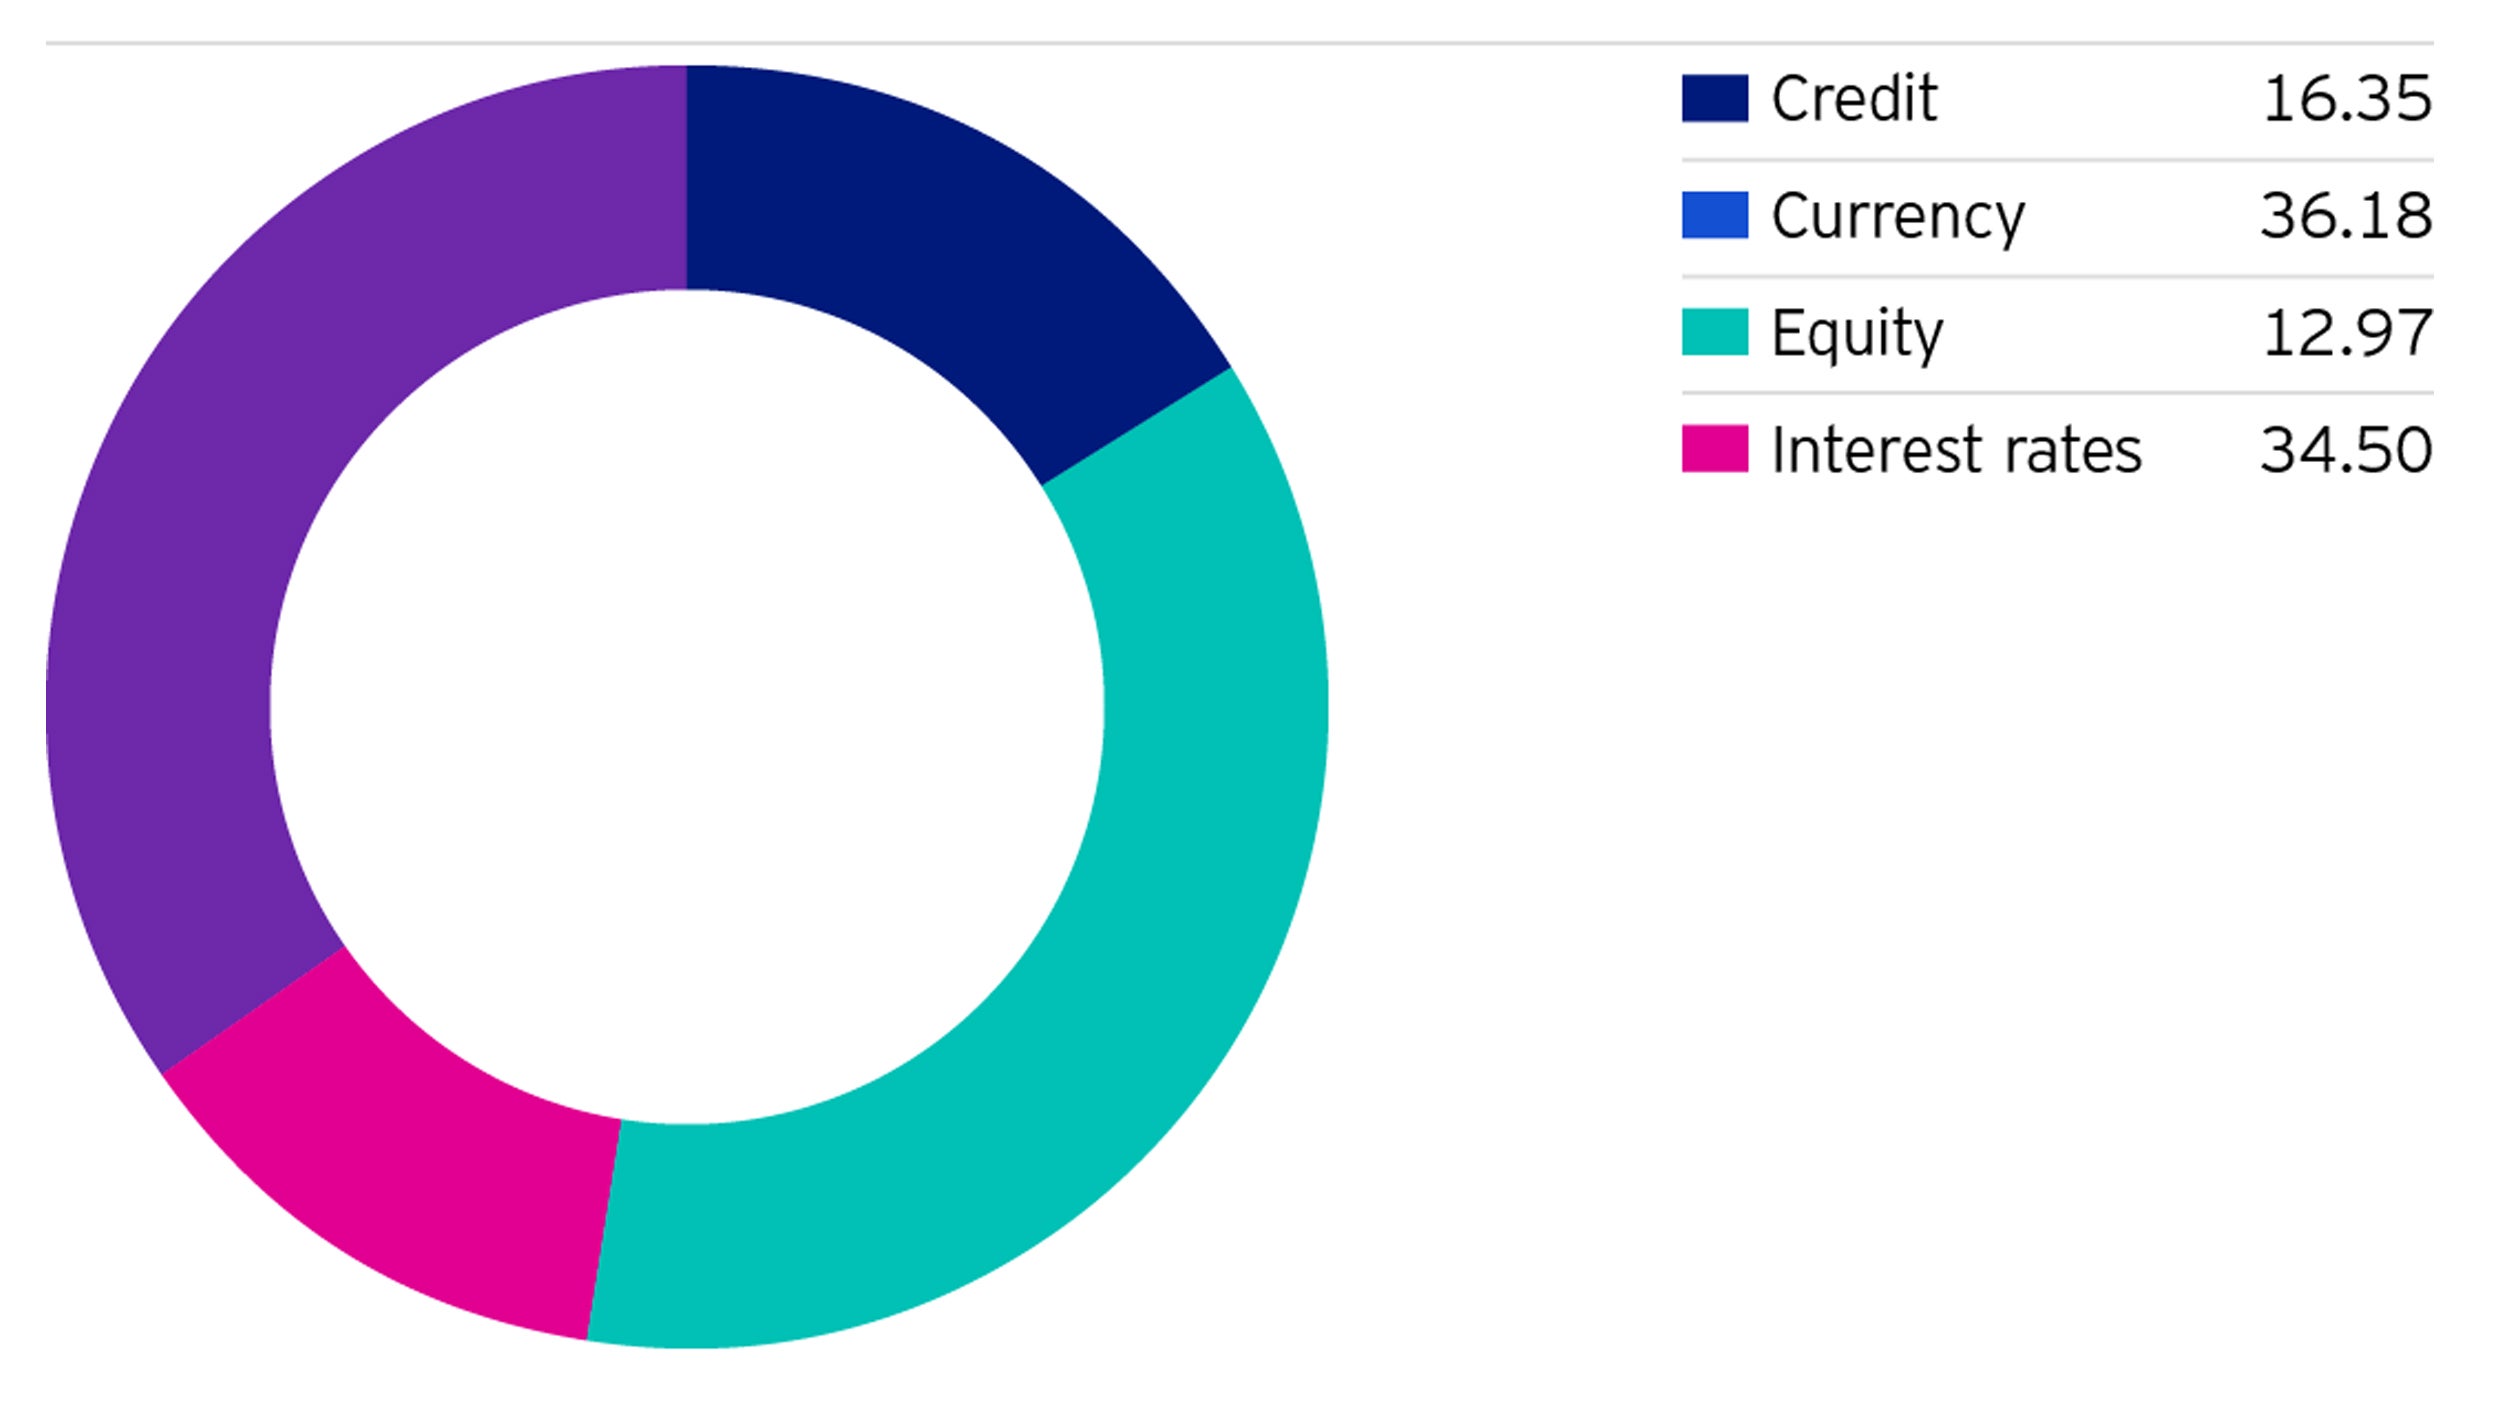 Figure 2: Percentage contribution to income across asset types in 2019